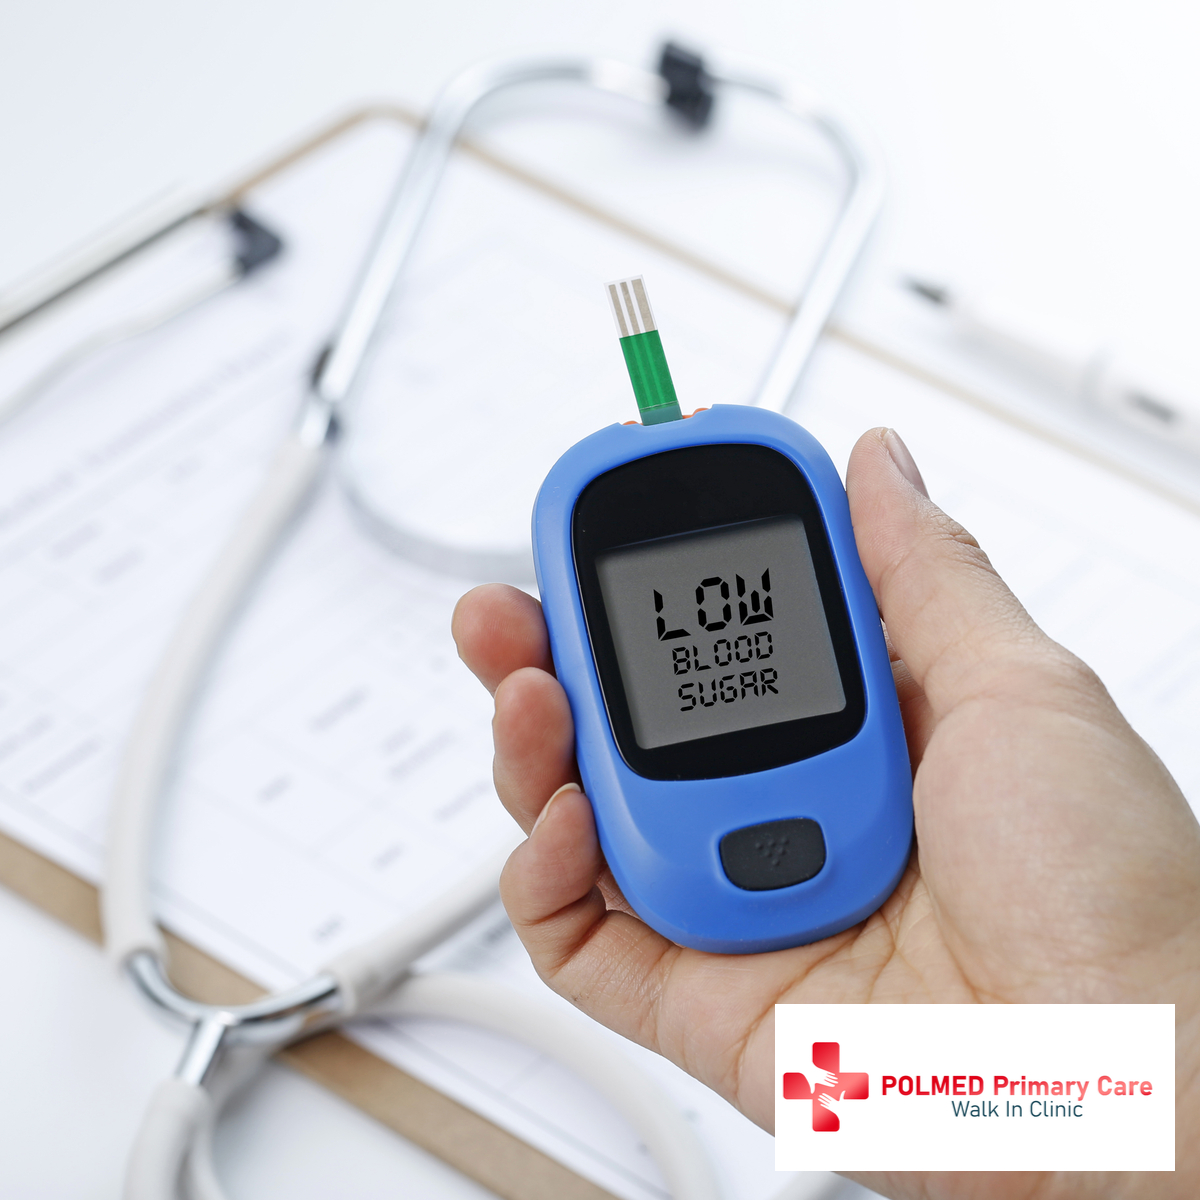 Seek Testing and Treatment for Low and High Blood Sugars With Us